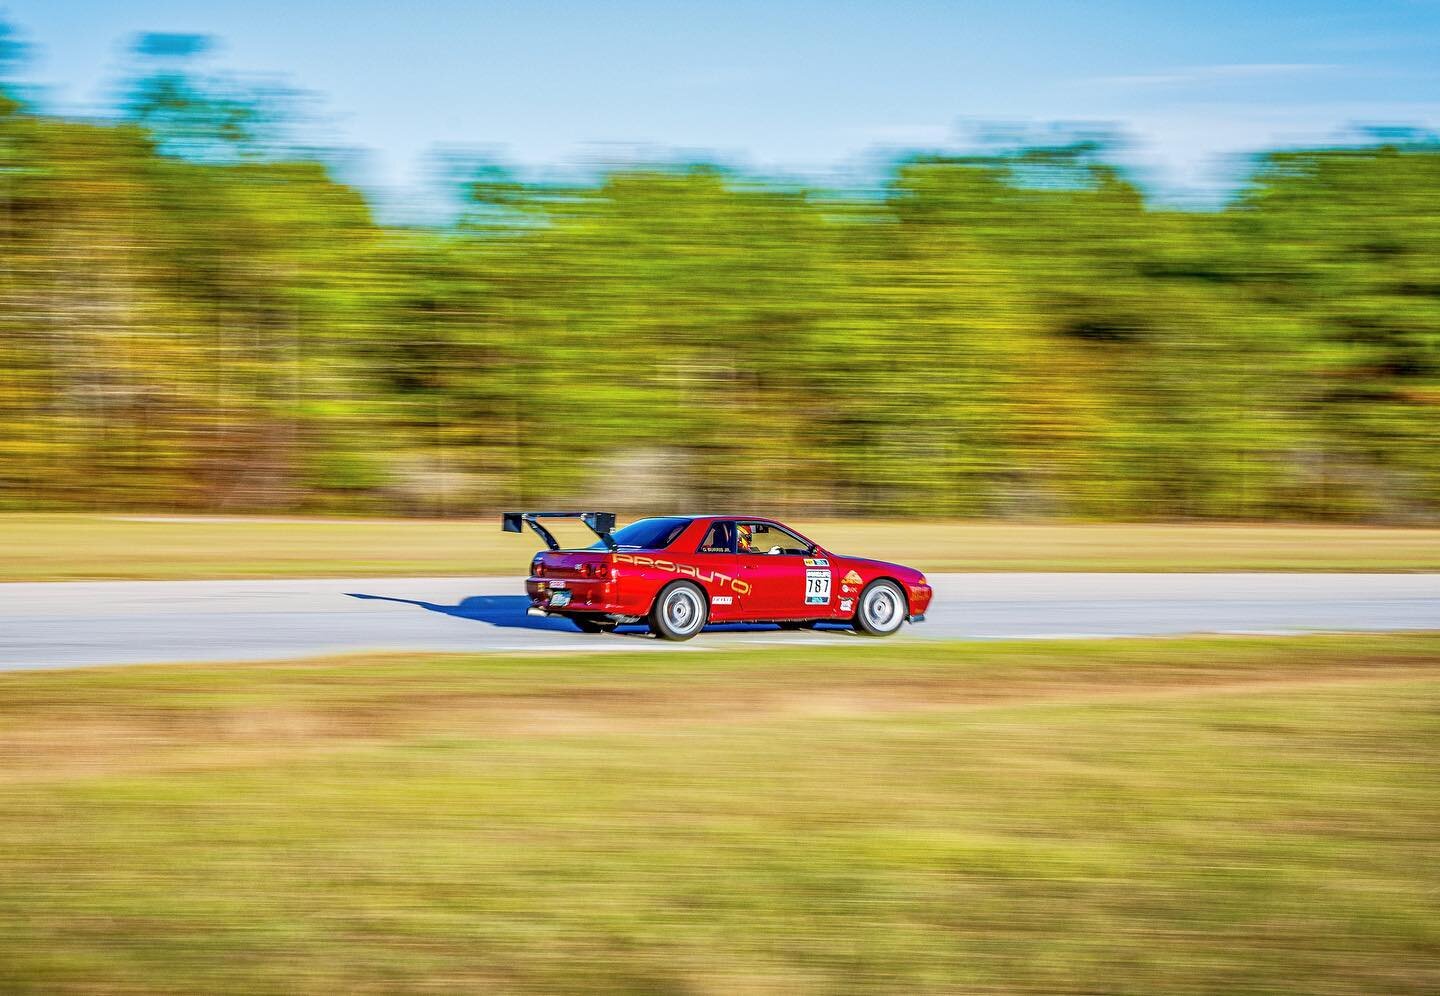 🏁Ready To Race🏆 
Check out Track Shaker Performance Driving Expert @annikacarter_ piloting this right-hand drive GTR at our video shoot @carolinamotorsportspark last fall. Annika is racing this weekend! Check out her page to follow her race progres